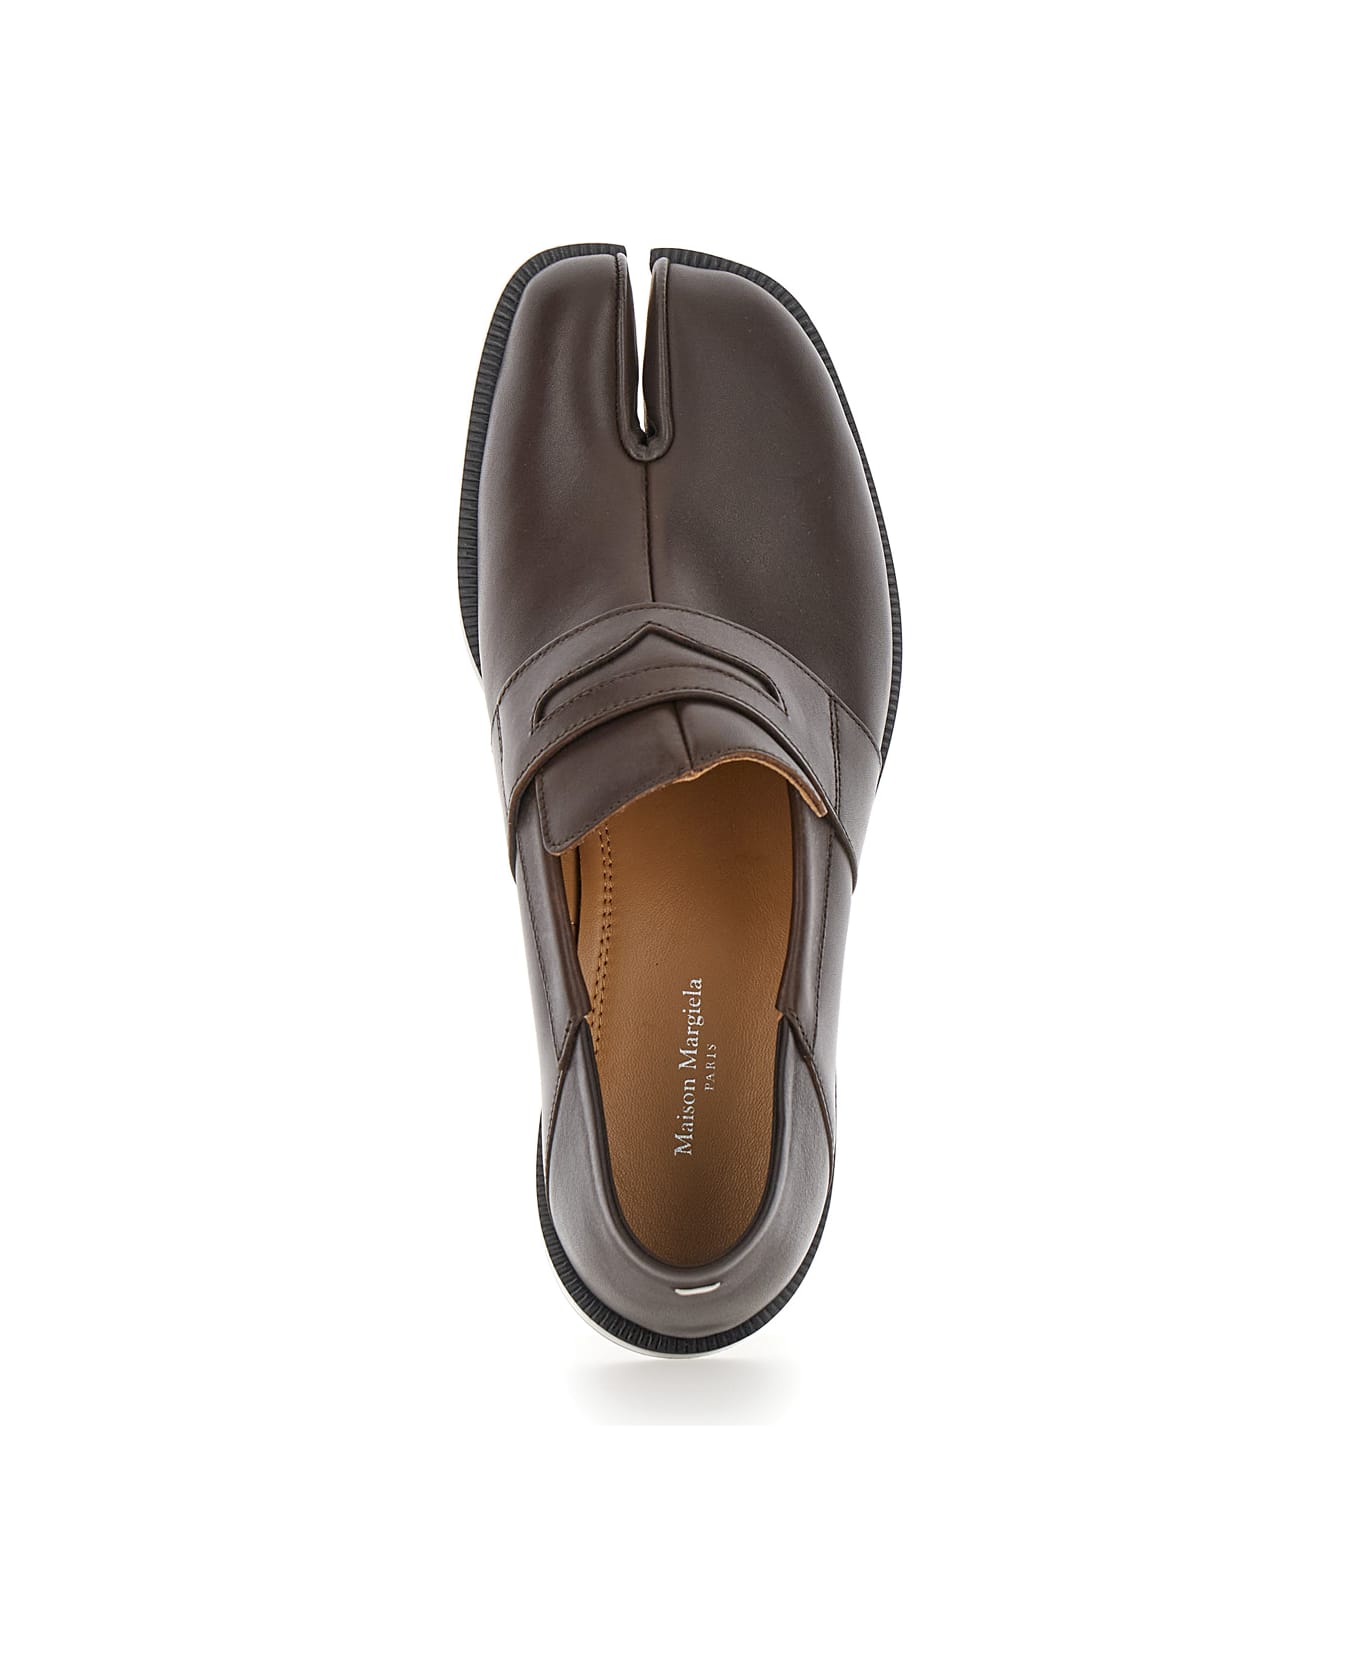 Maison Margiela 'tabi' Loafer In Leather Woman - Brown